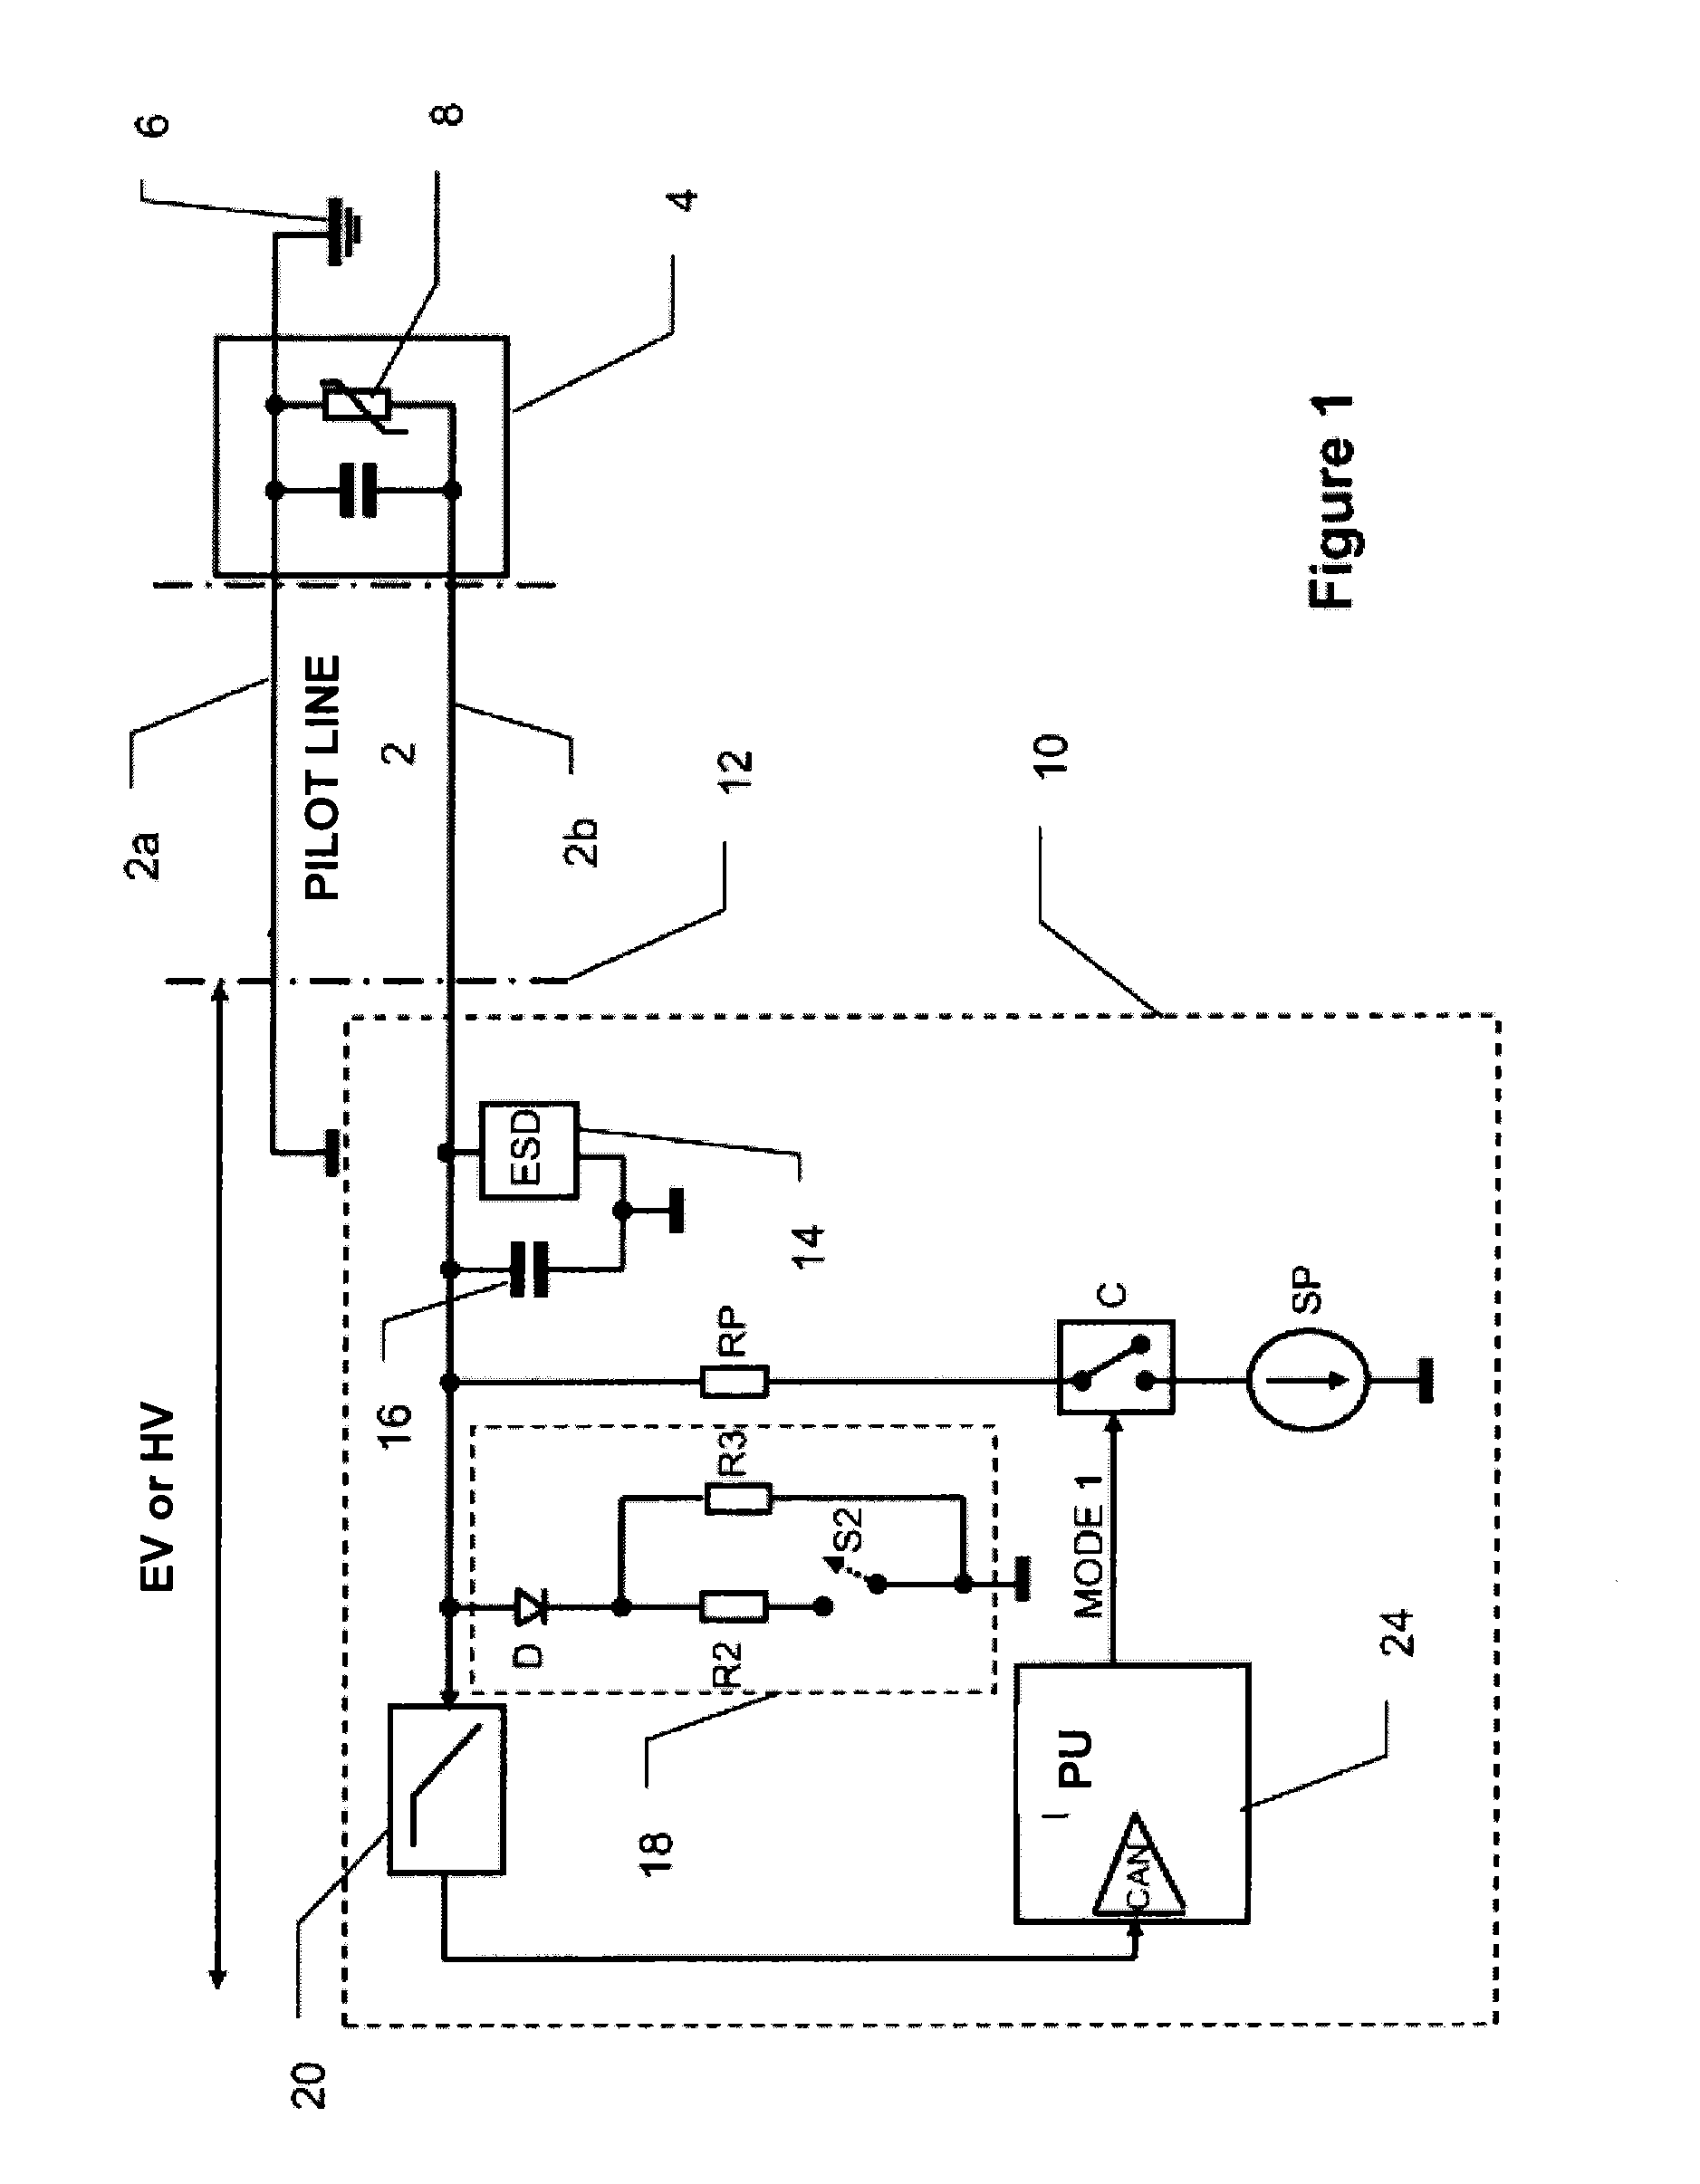 System for charging an electric or hybrid vehicle